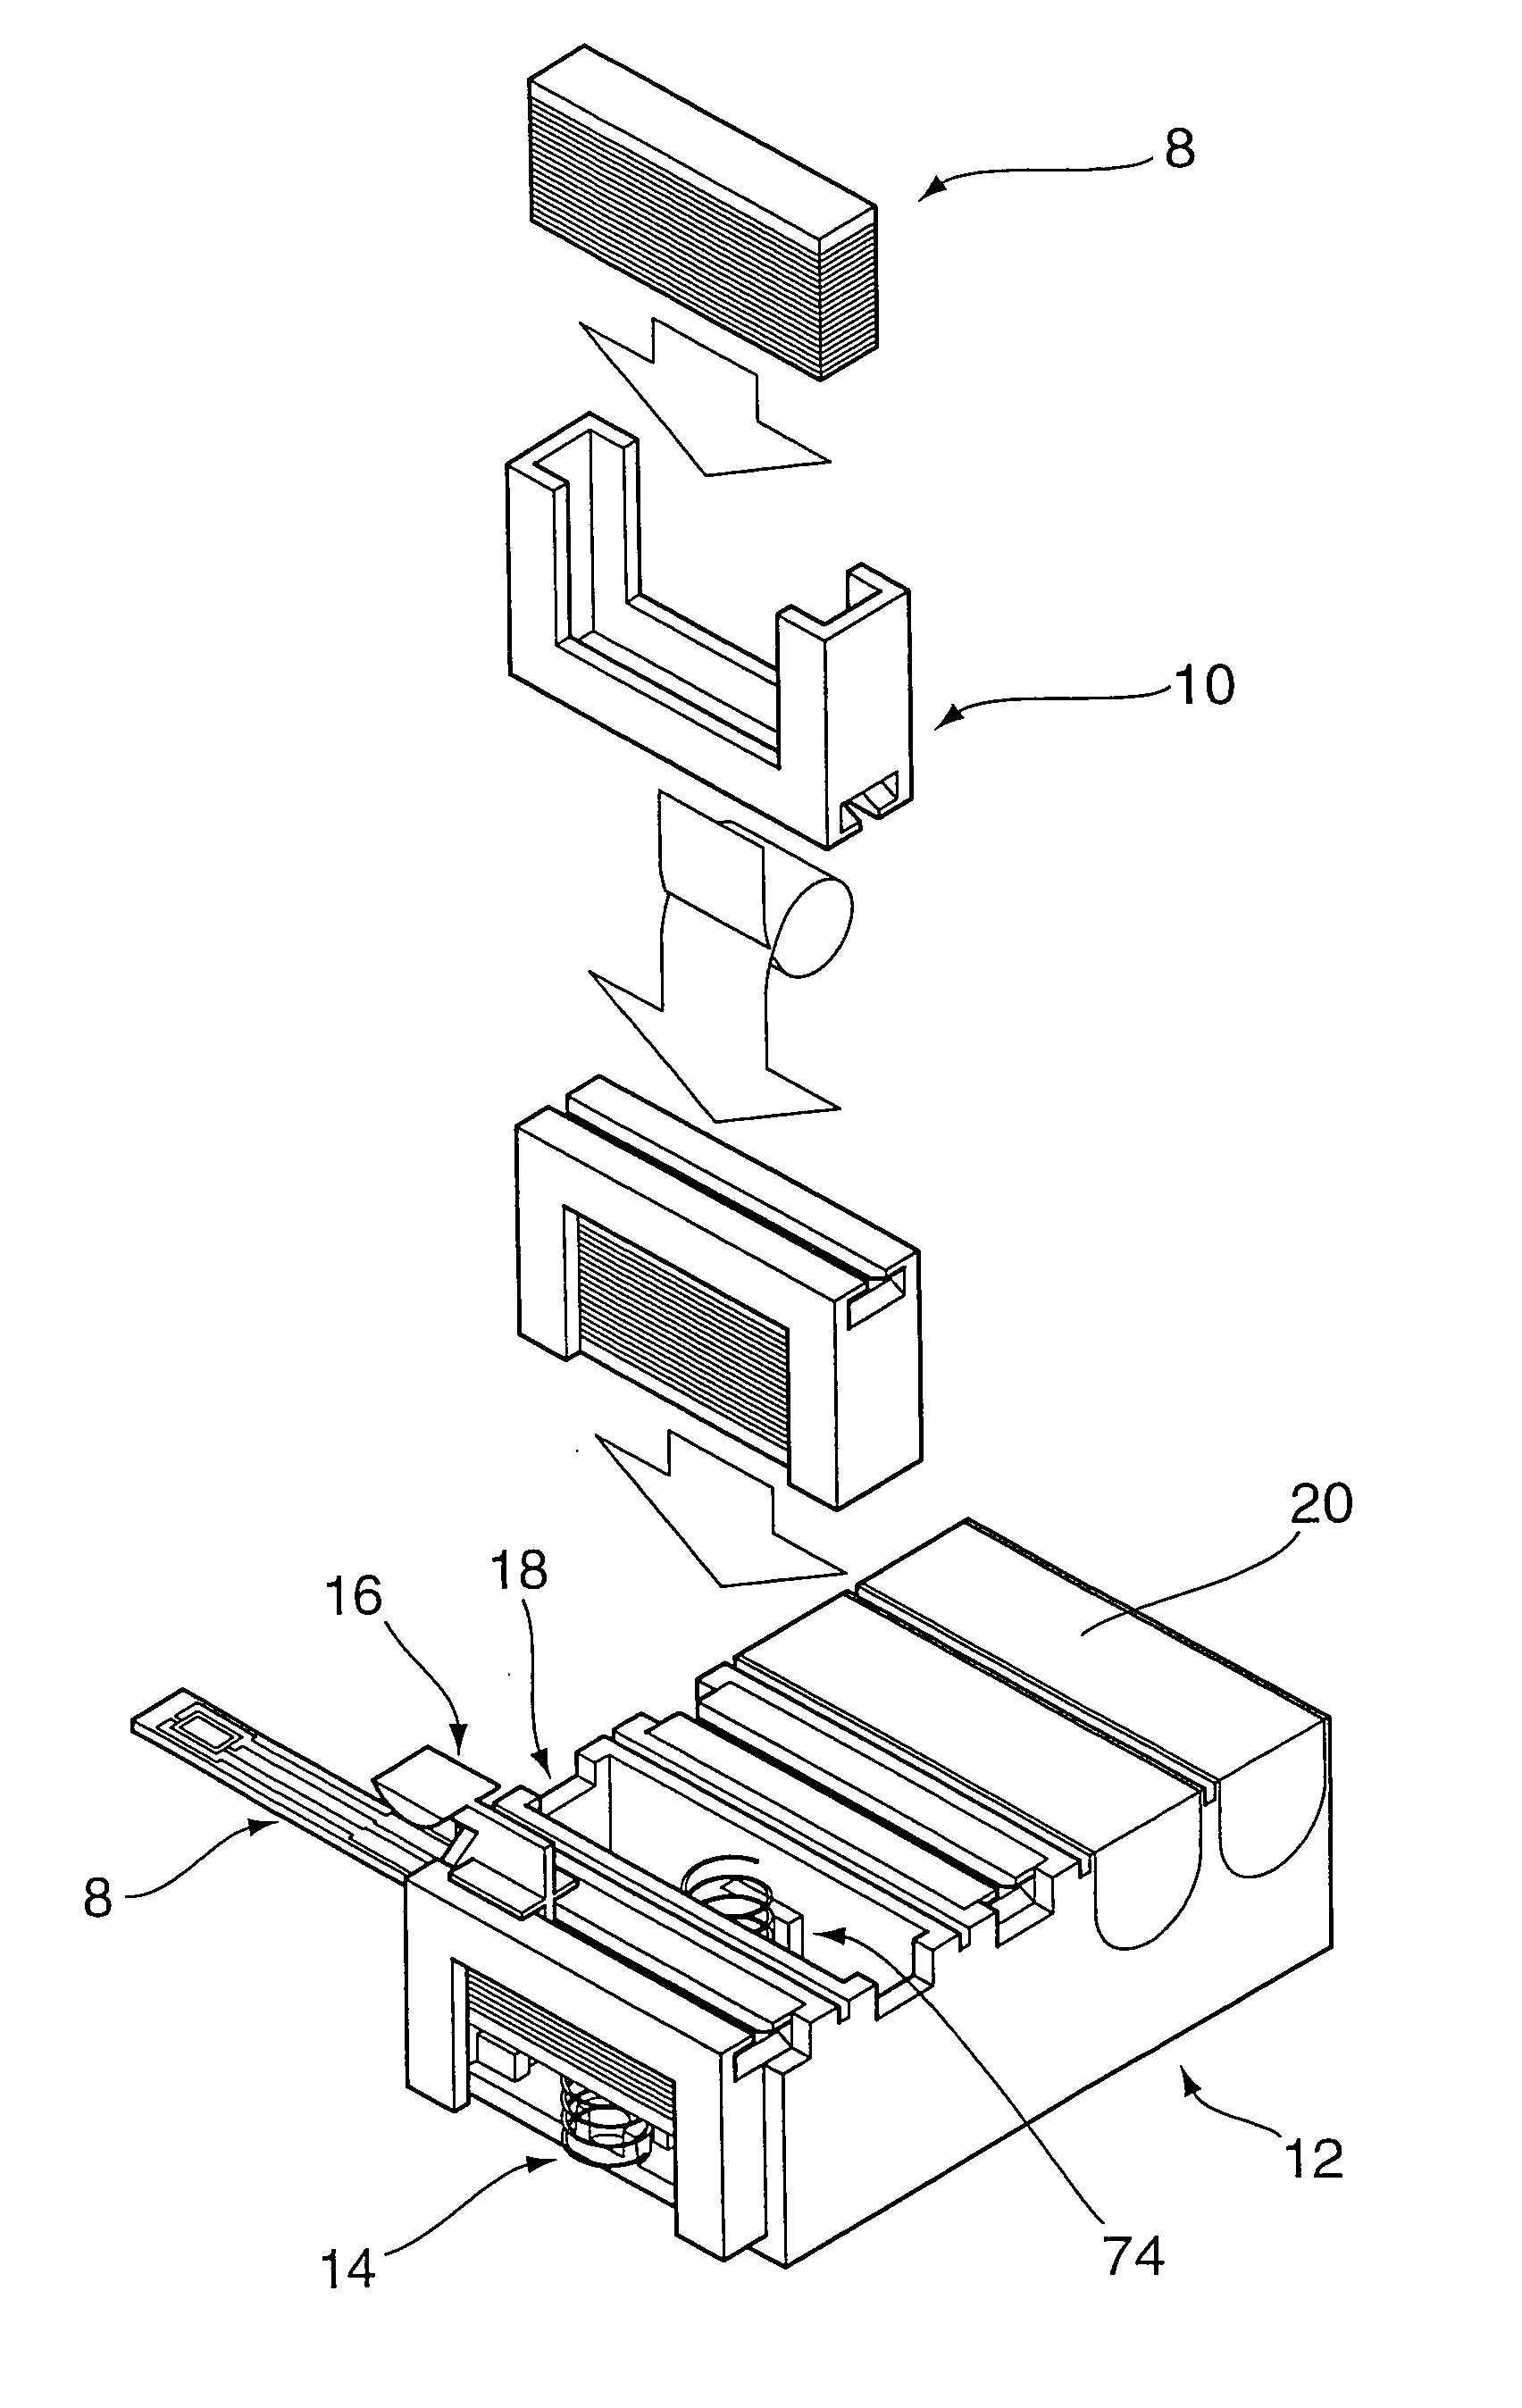 Test device for analyzing blood glucose or other analytes in bodily fluids